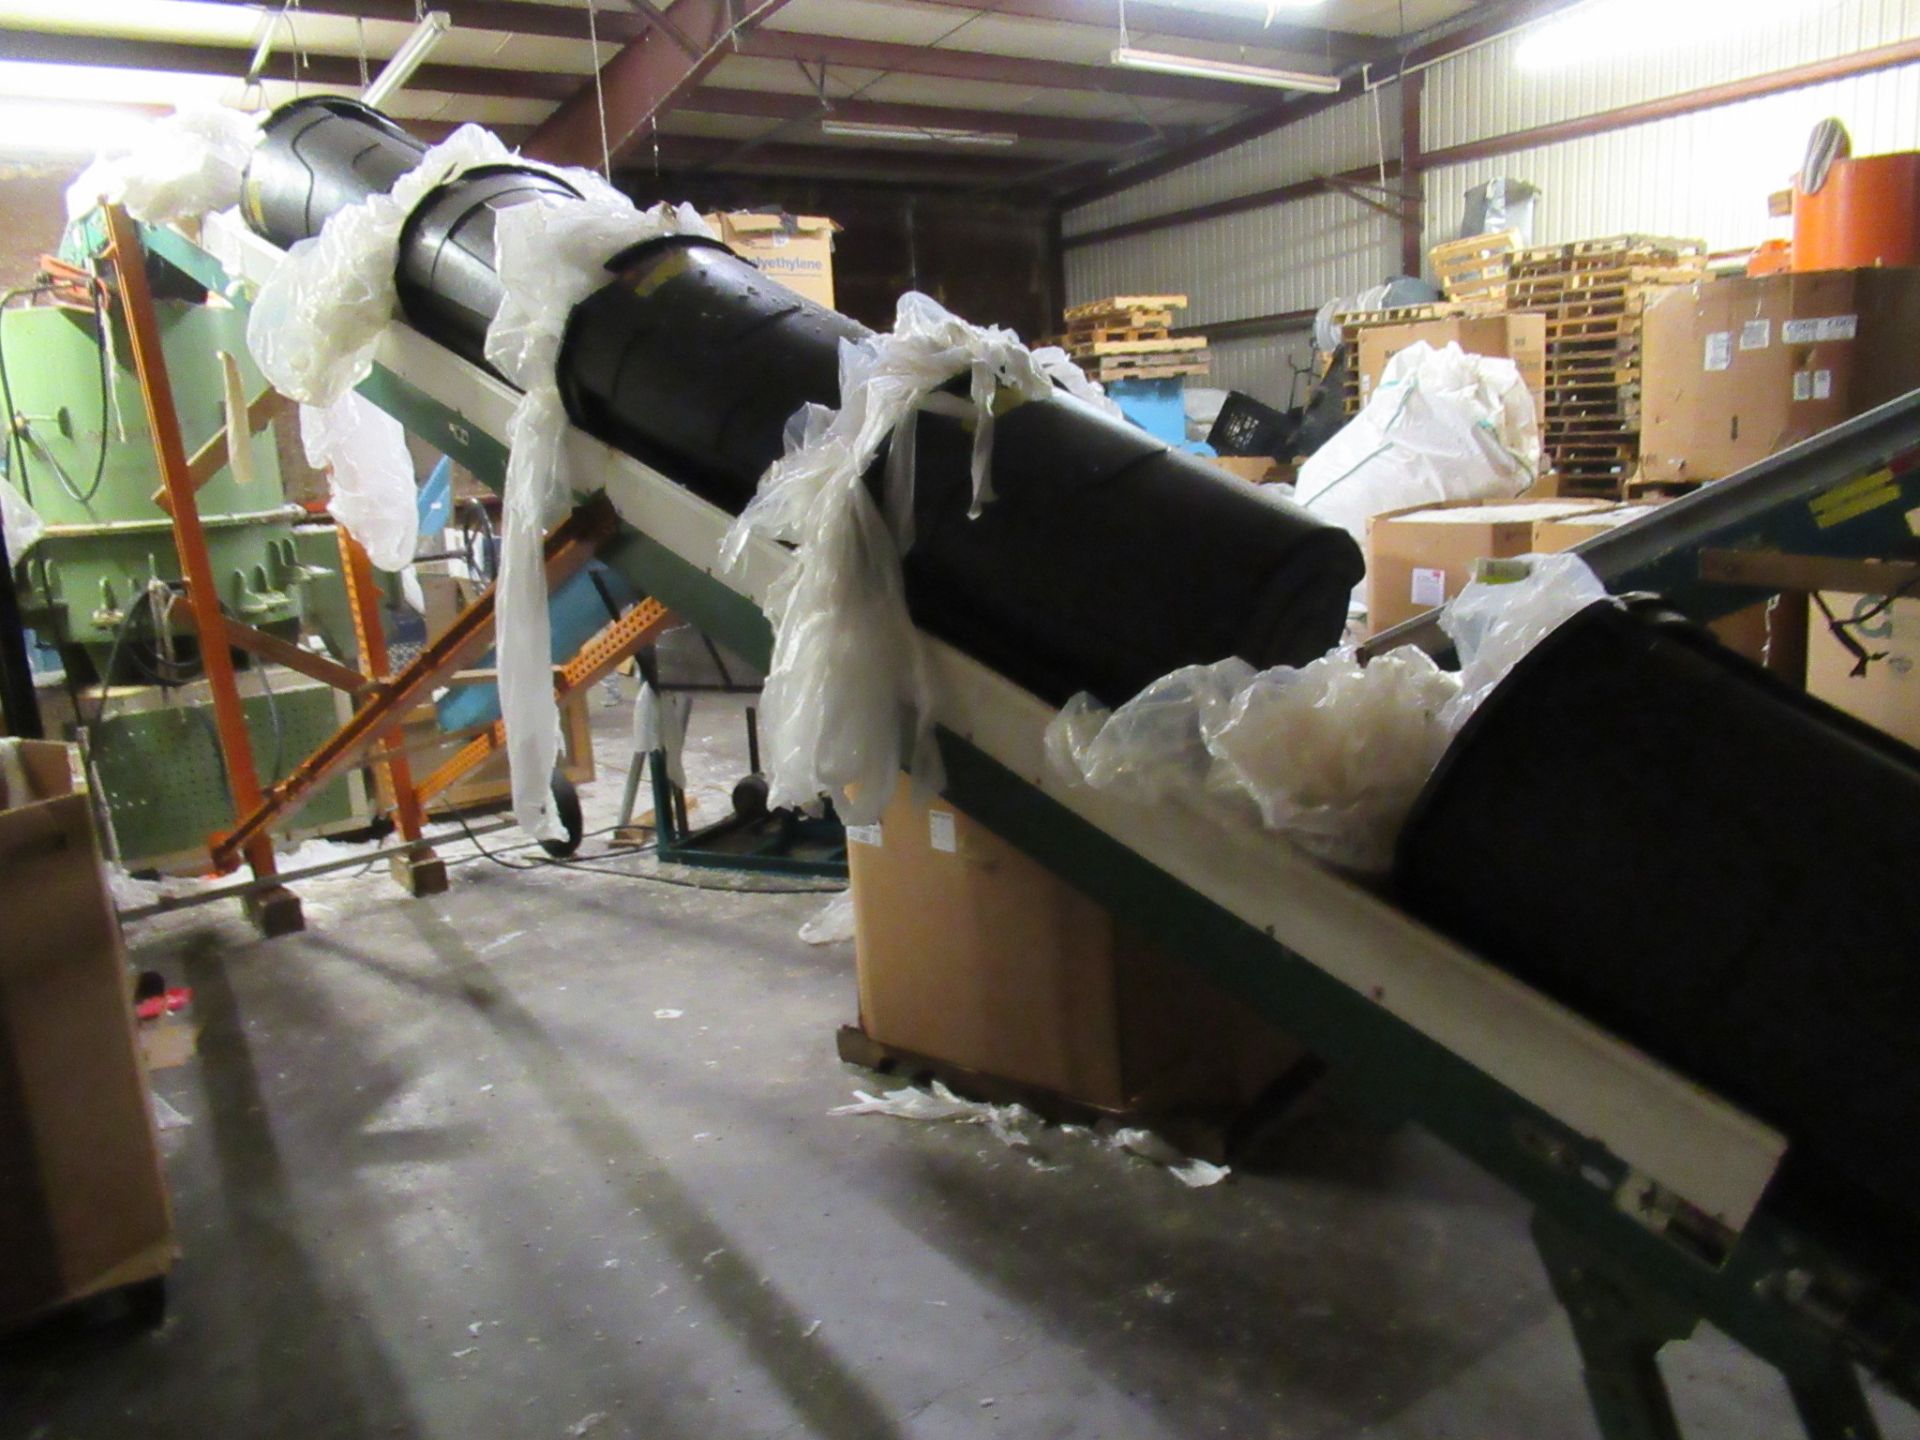 CUSTOM 42” PLASTIC AGGLOMERATION LINE, 500 lbs./hr., Automated Conveyor Systems 16”W. belt type - Image 6 of 6